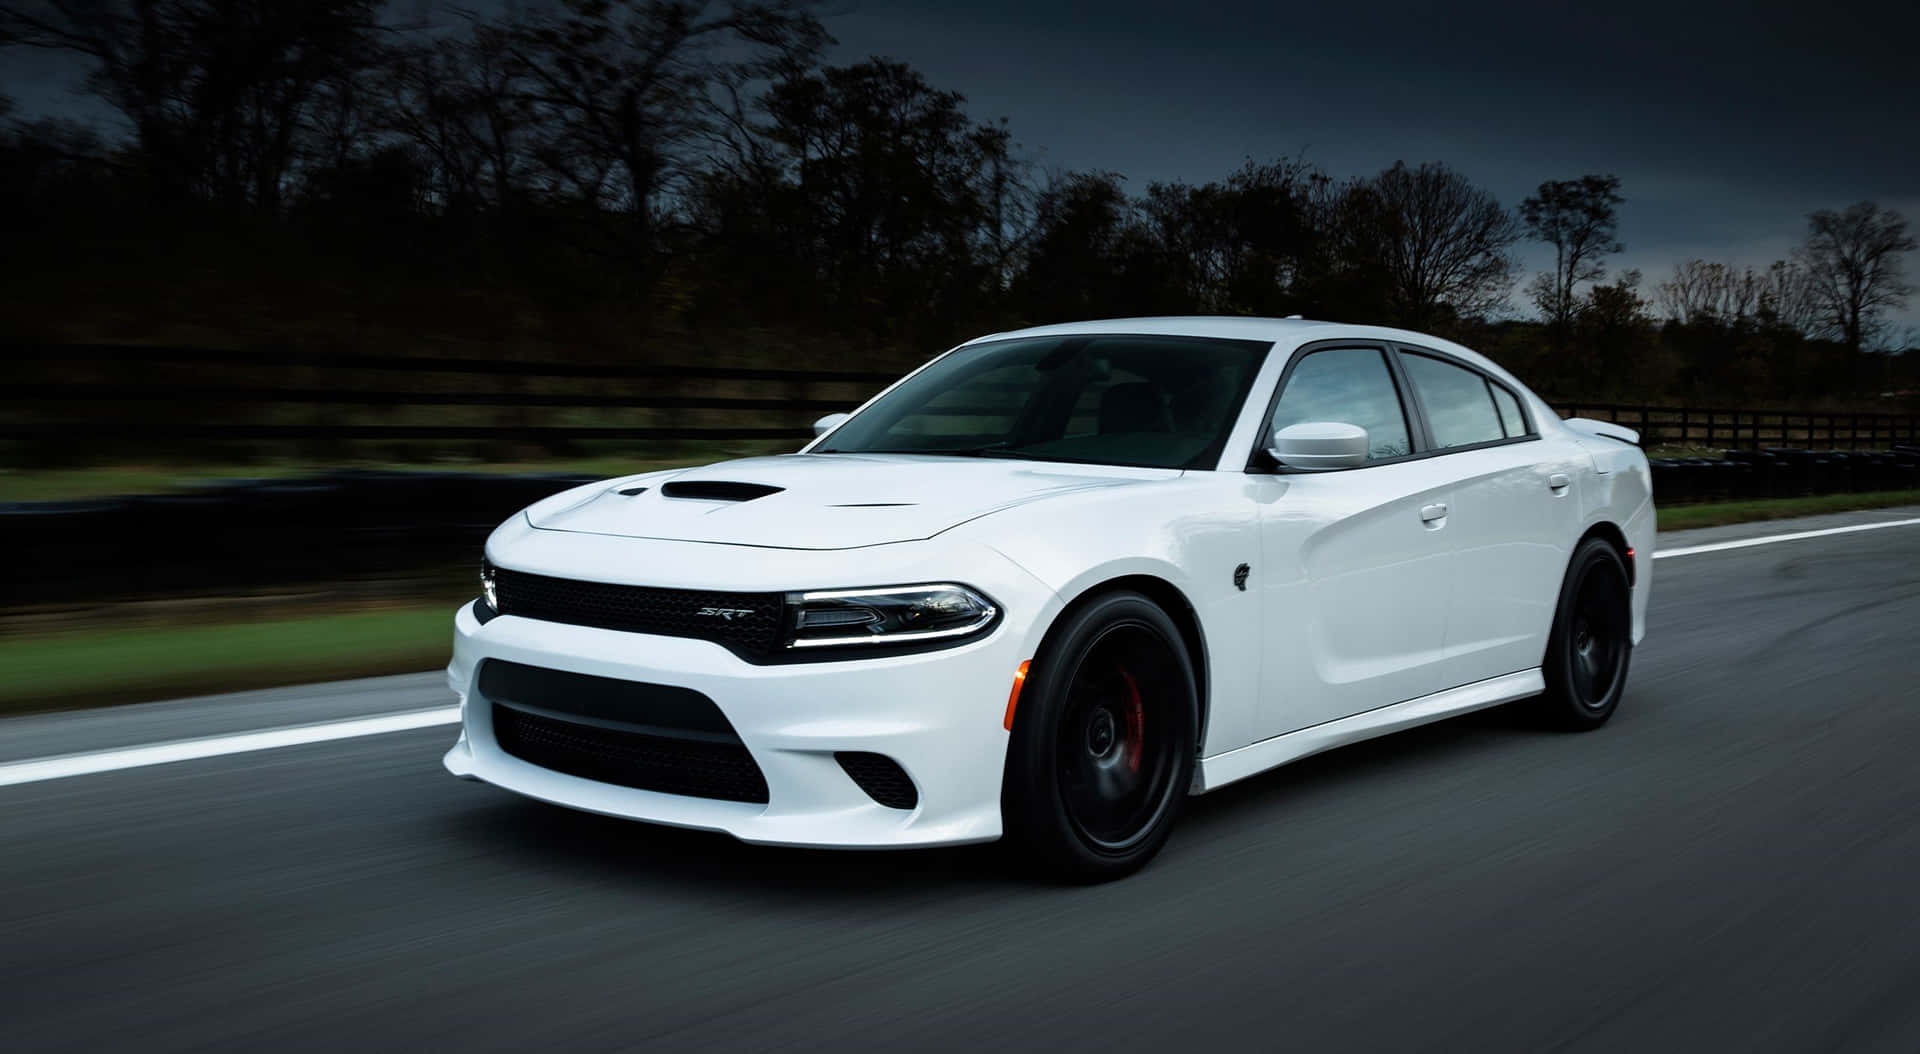 Stunning Dodge Charger in Action Wallpaper